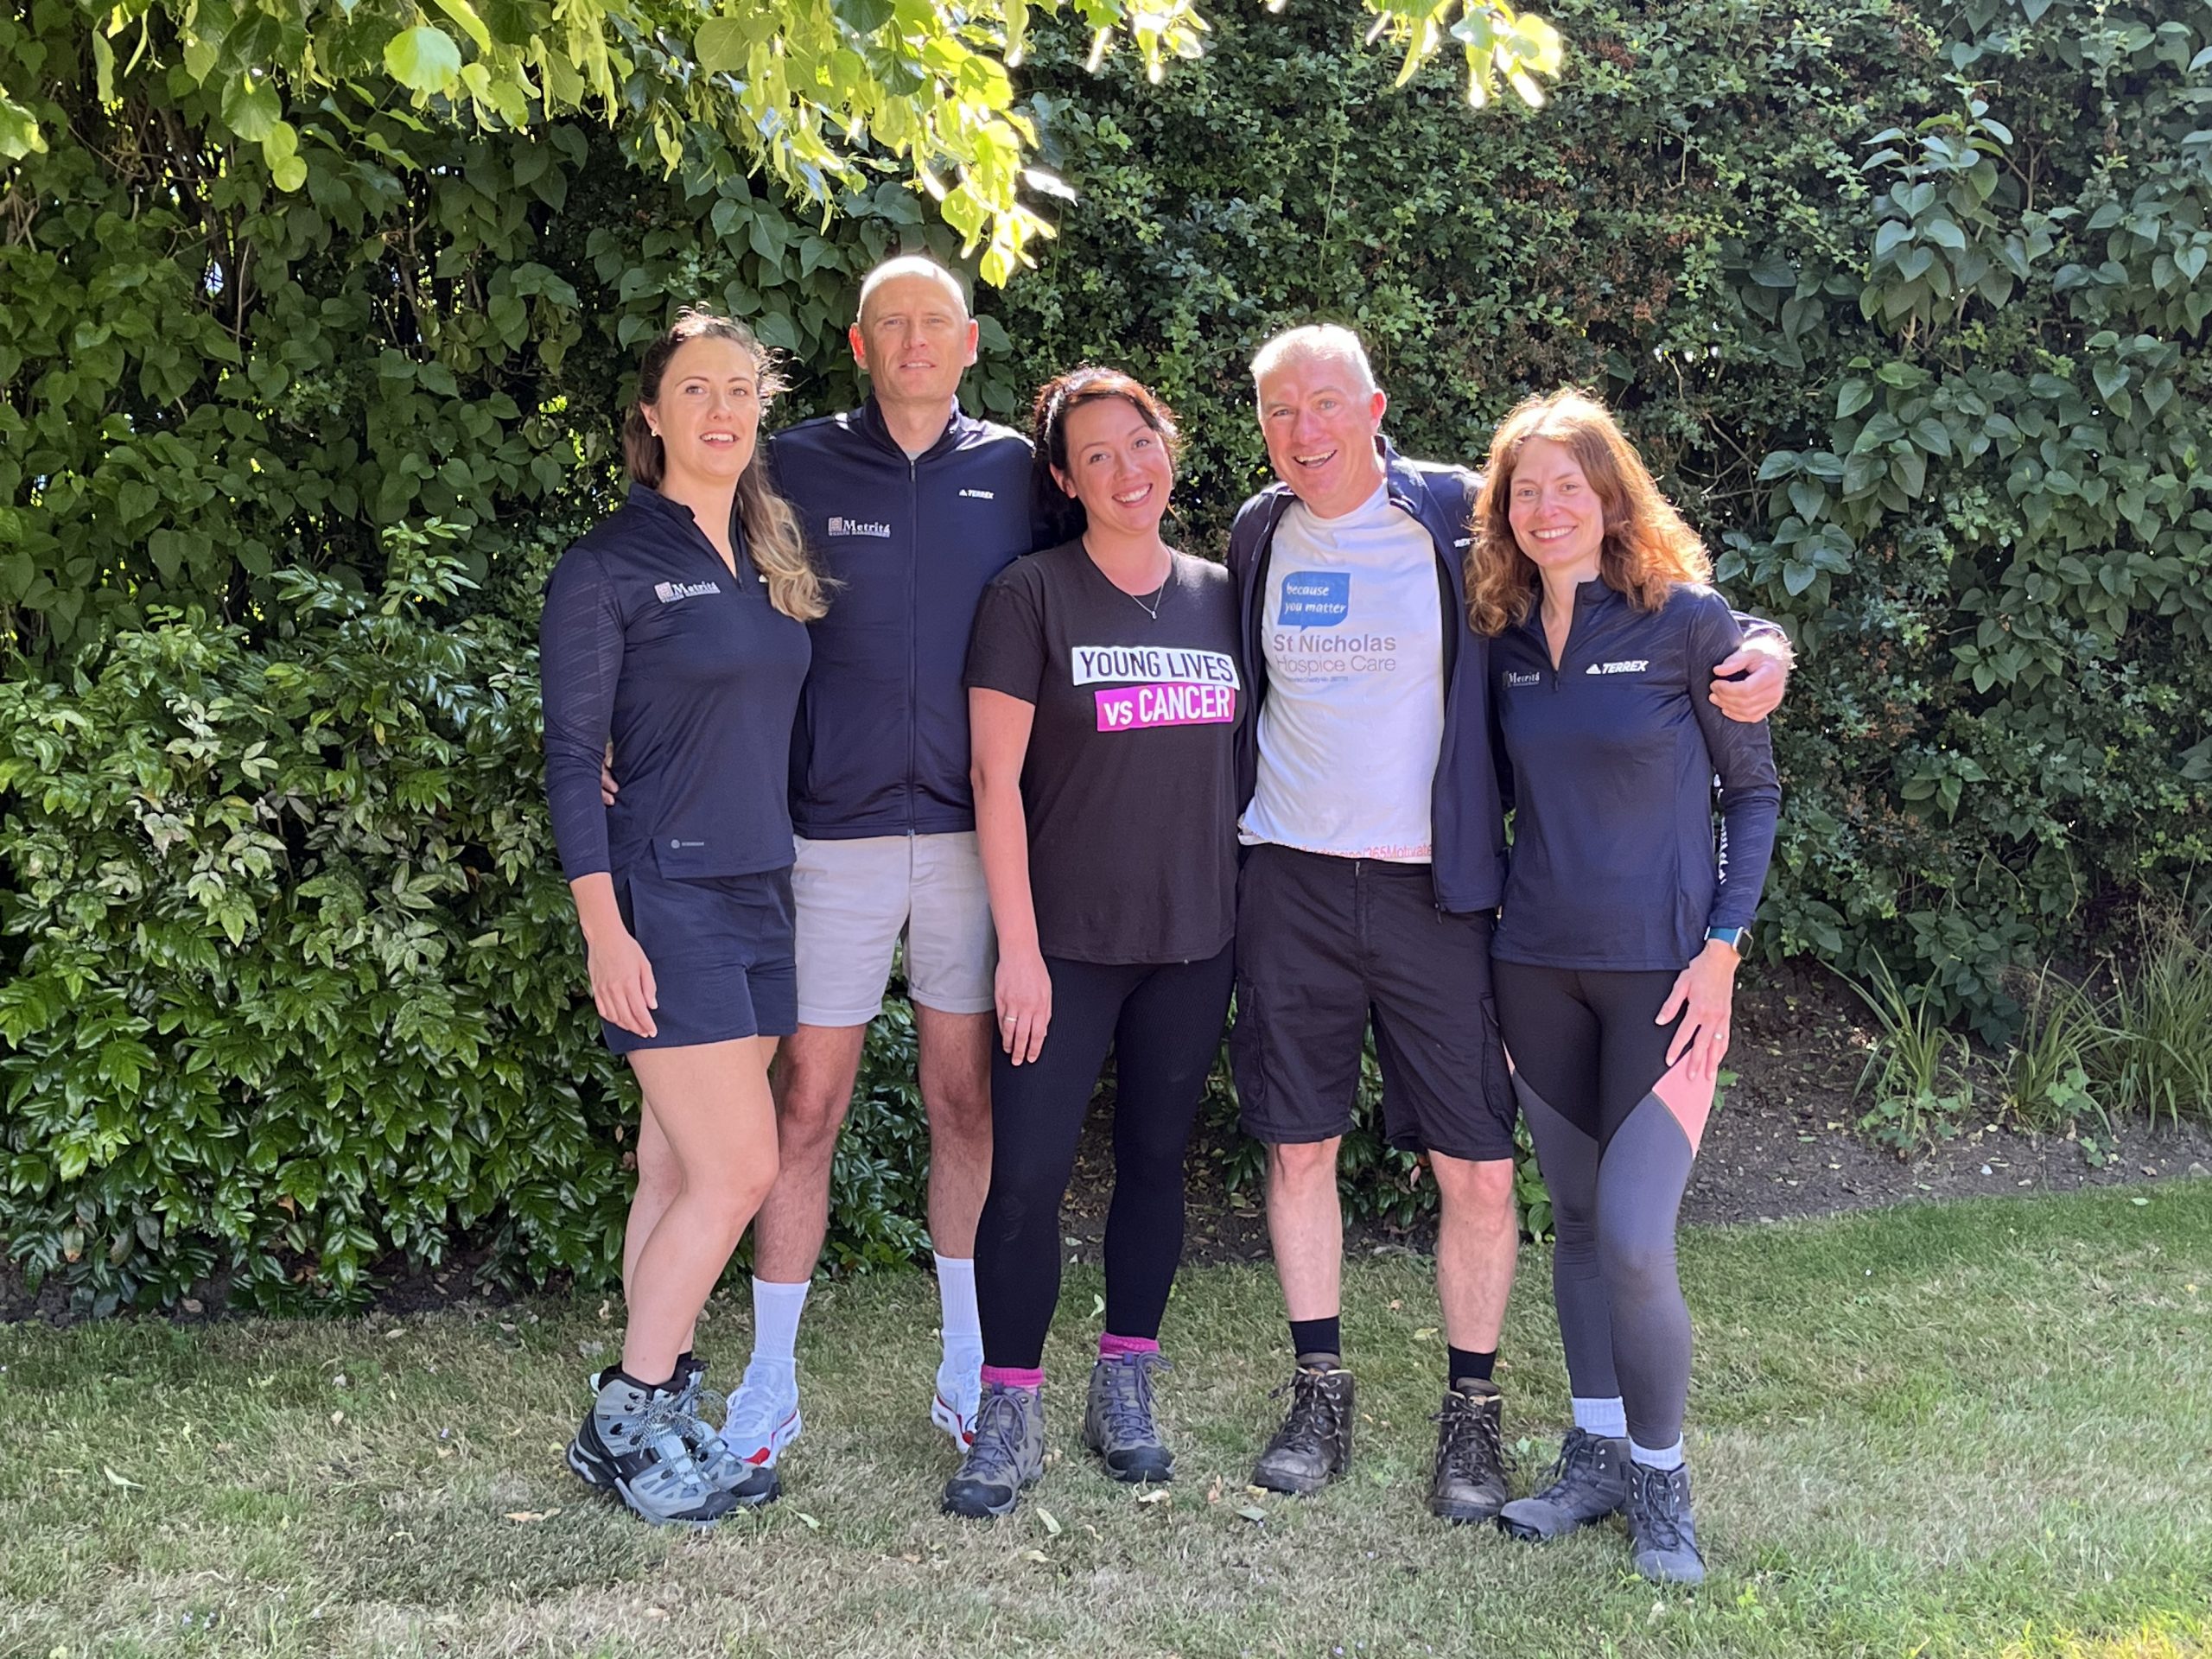 (Left to right) The team from Metrita Wealth Management Lucinda Nurse, Lee Johnson, Emma Bryant, Andrew Ross and Charlotte MacDonald, who will be tackling the Yorkshire Three Peaks to raise funds for St Nicholas Hospice Care and another charity.